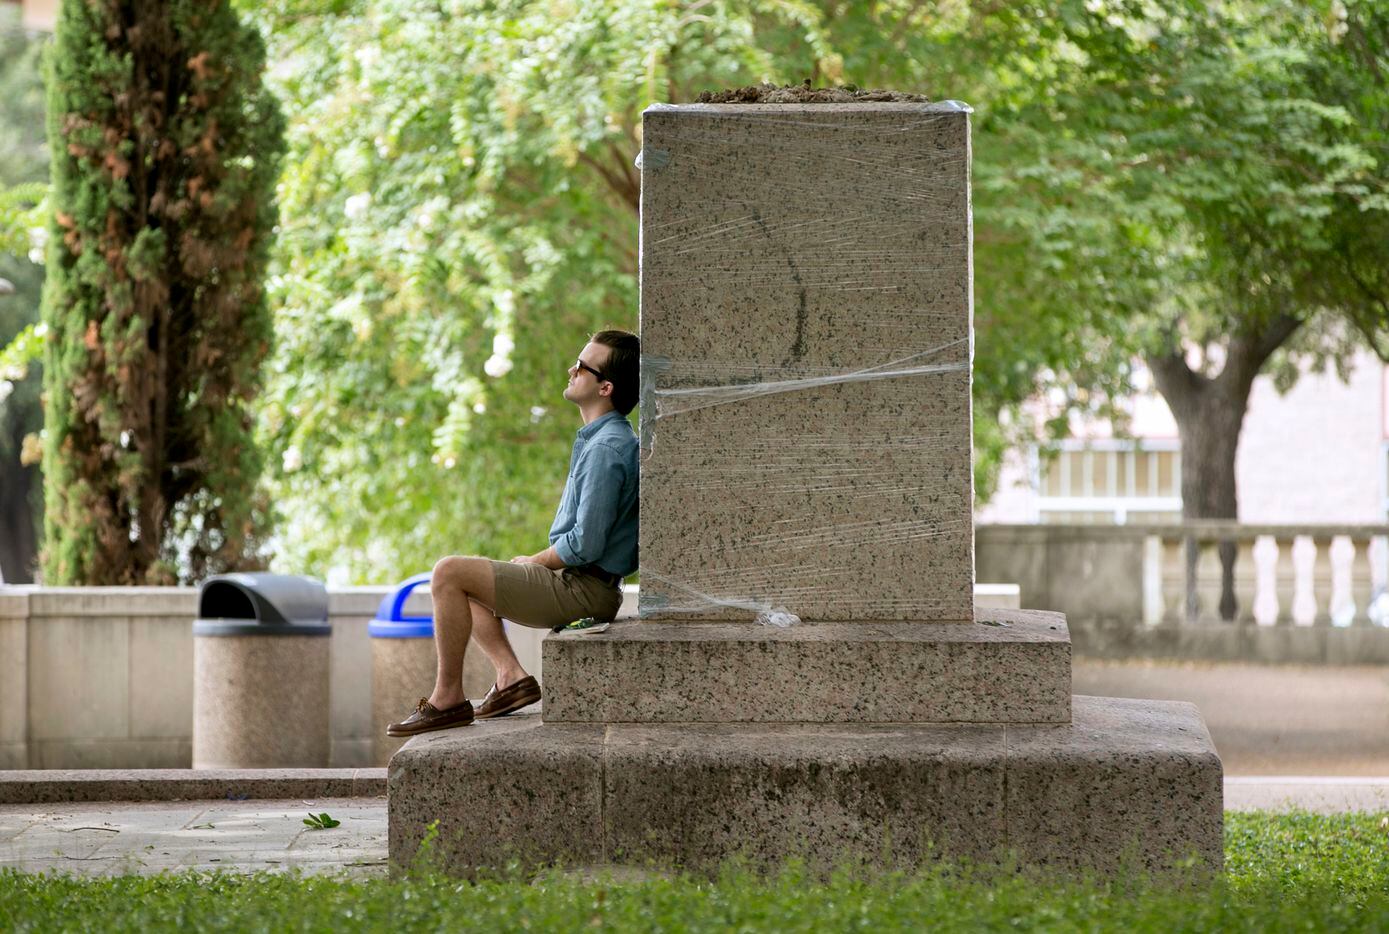 Edwin Bryan Robert Jr. sits at the base of a pedestal and "remembers history" after a statue...